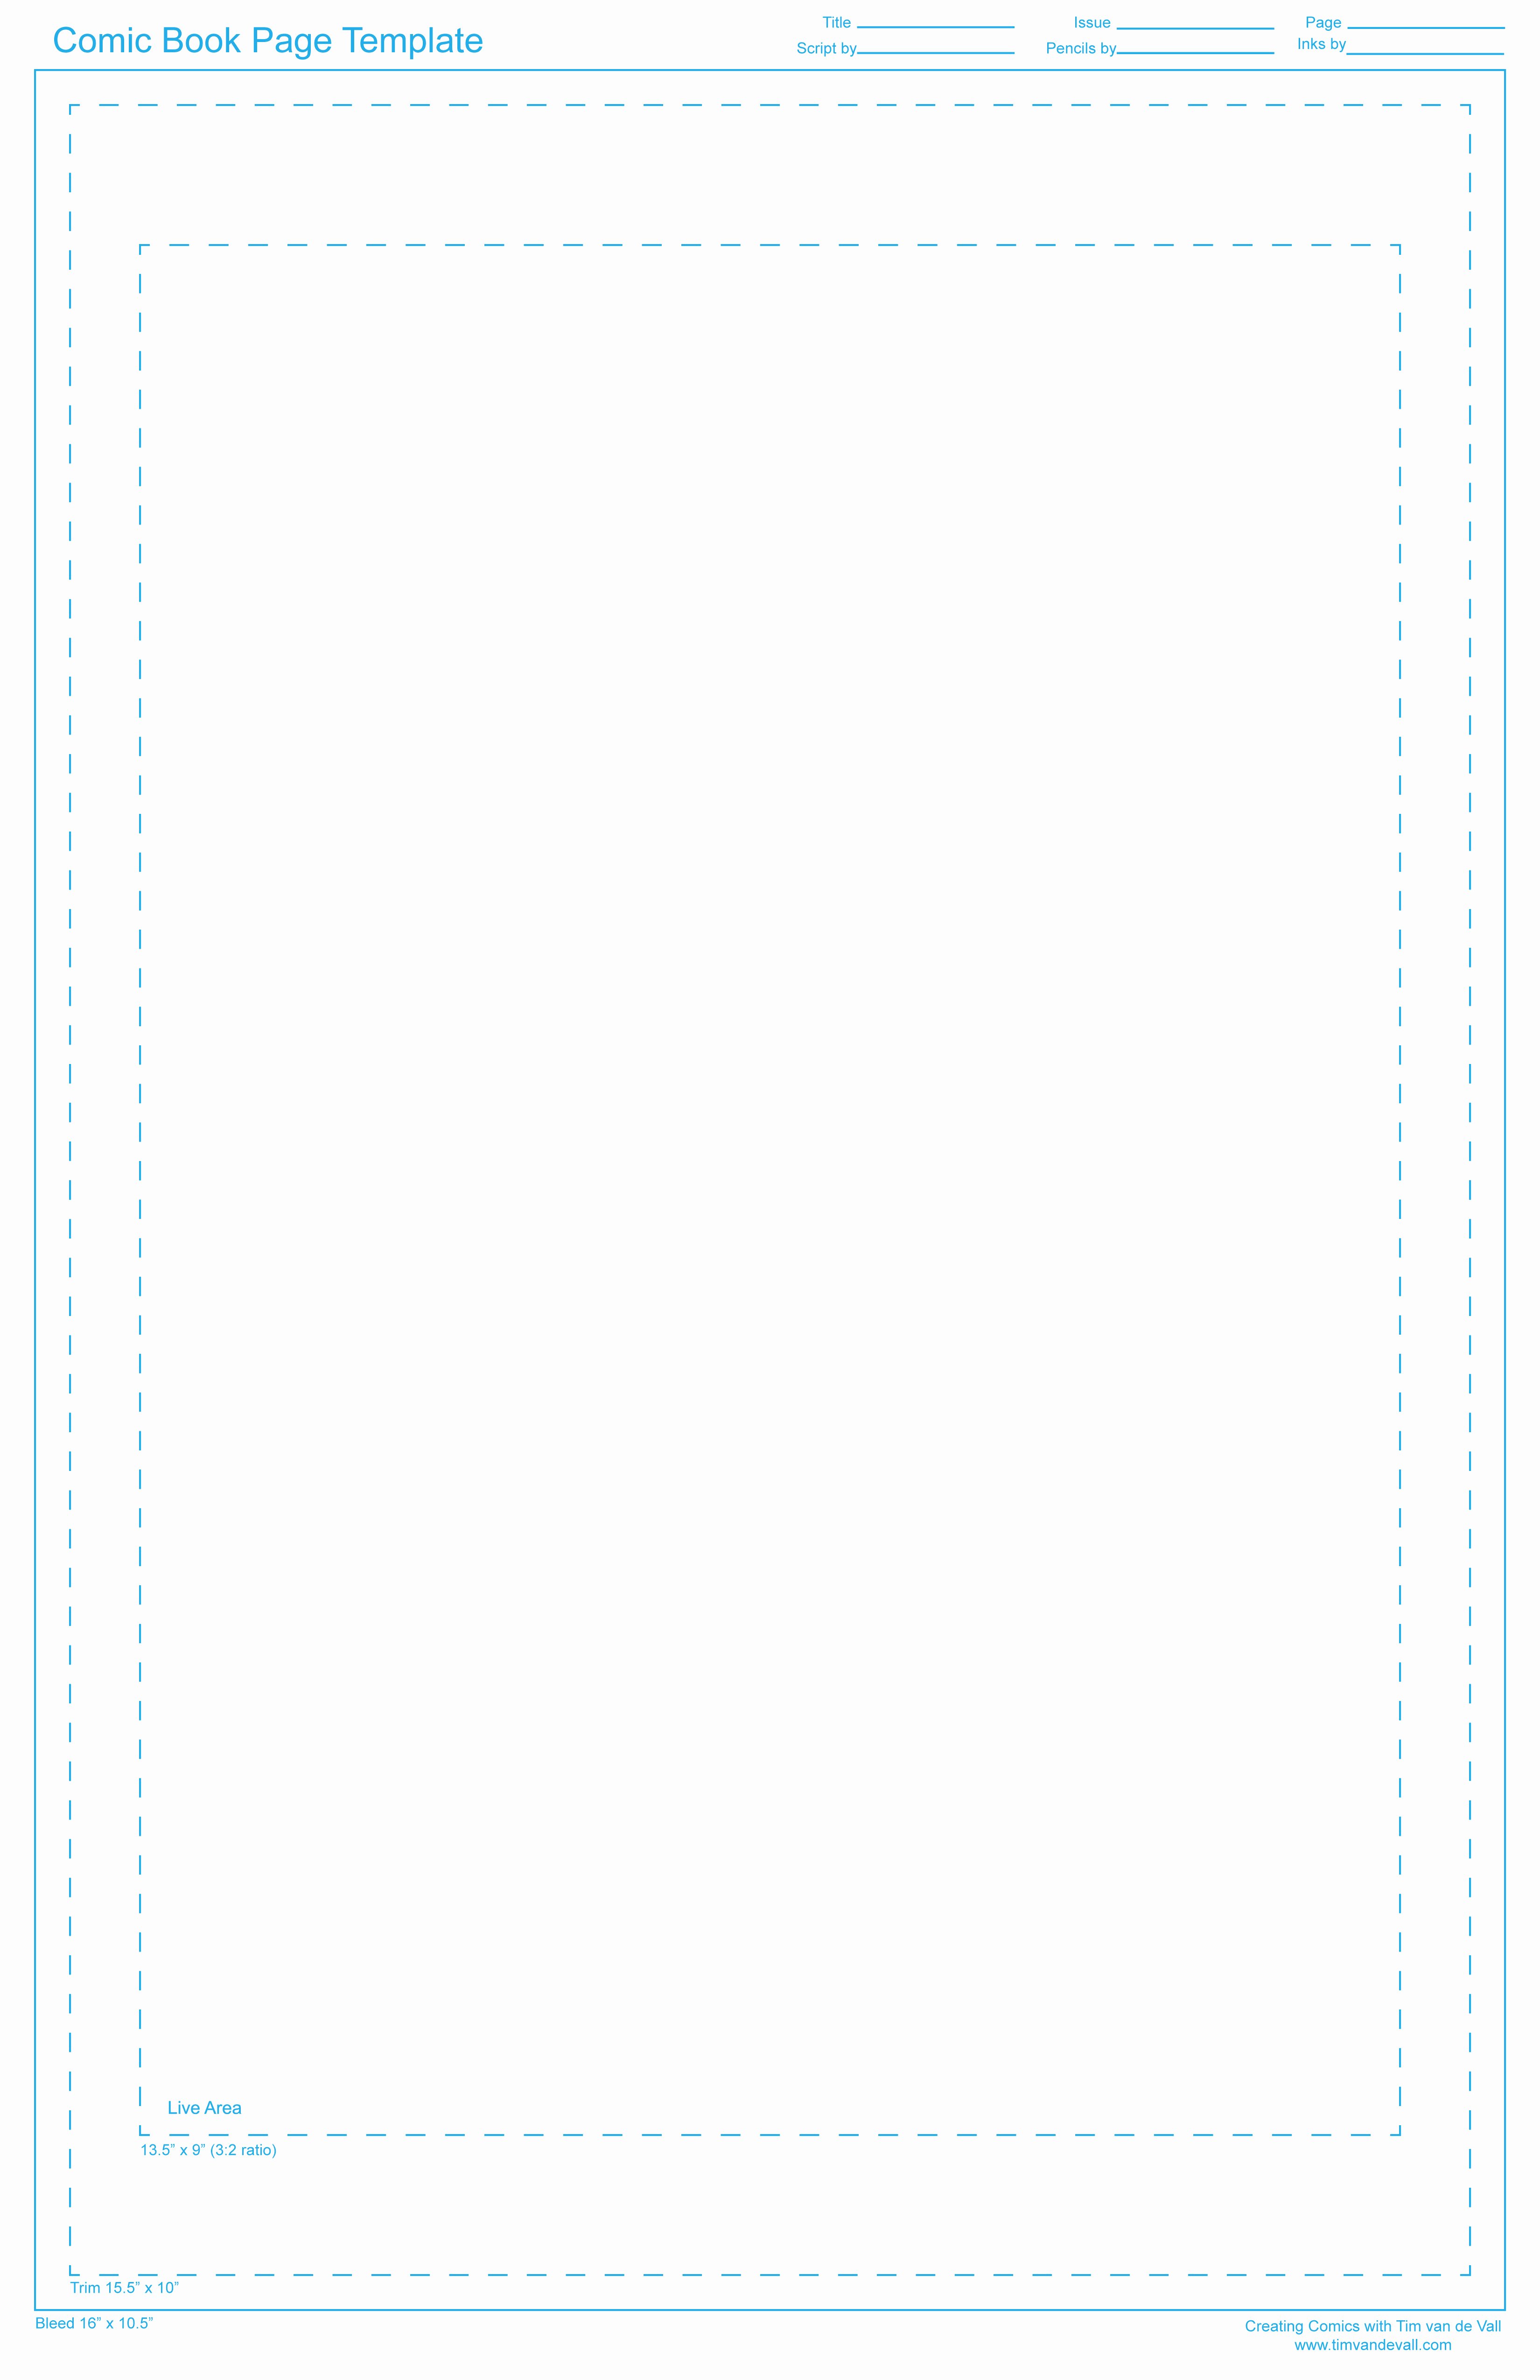 Comic Book Template Photoshop Unique Free Ic Book Page Template Creating Ics with Tim